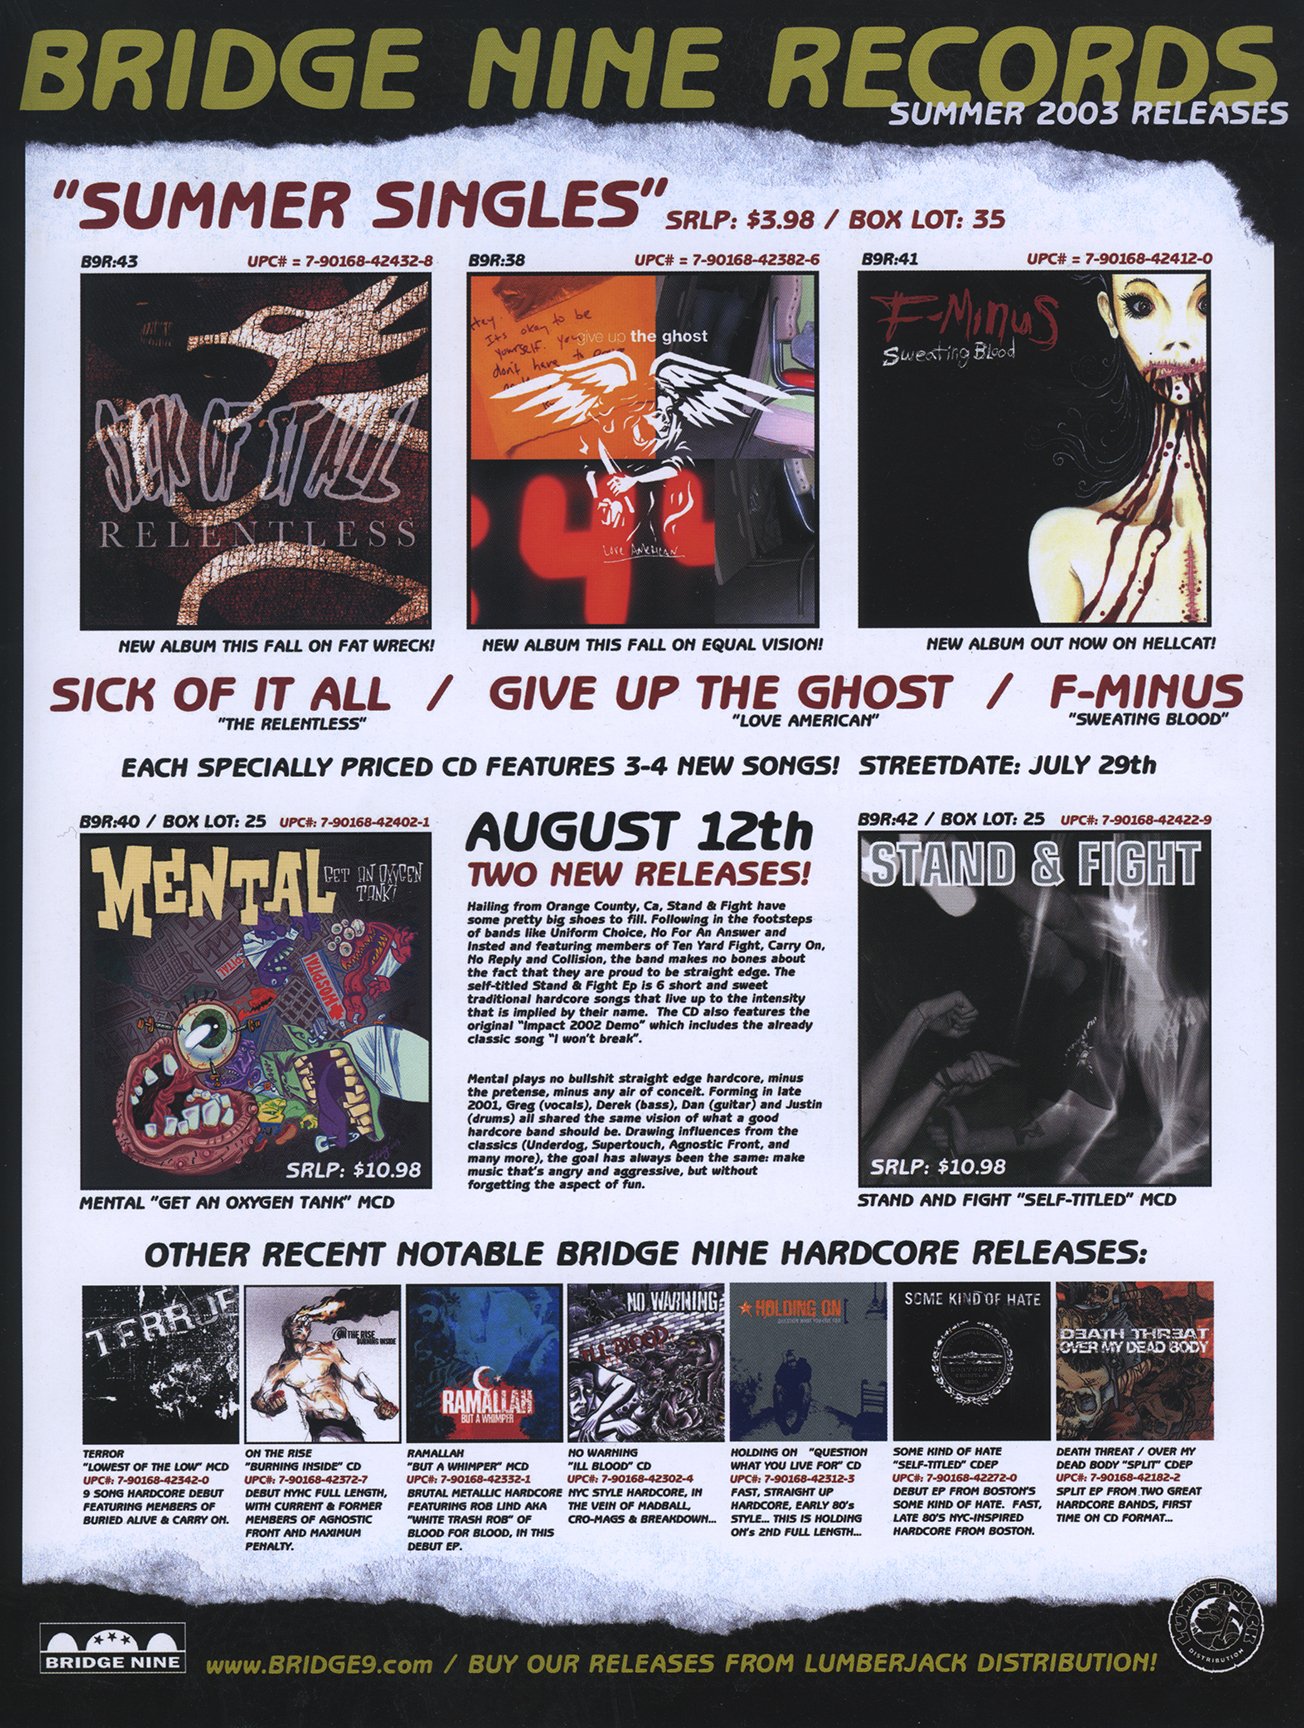 Full-page ad for Bridge Nine's 2003 releases in the Lumberjack Distribution catalog (2003)